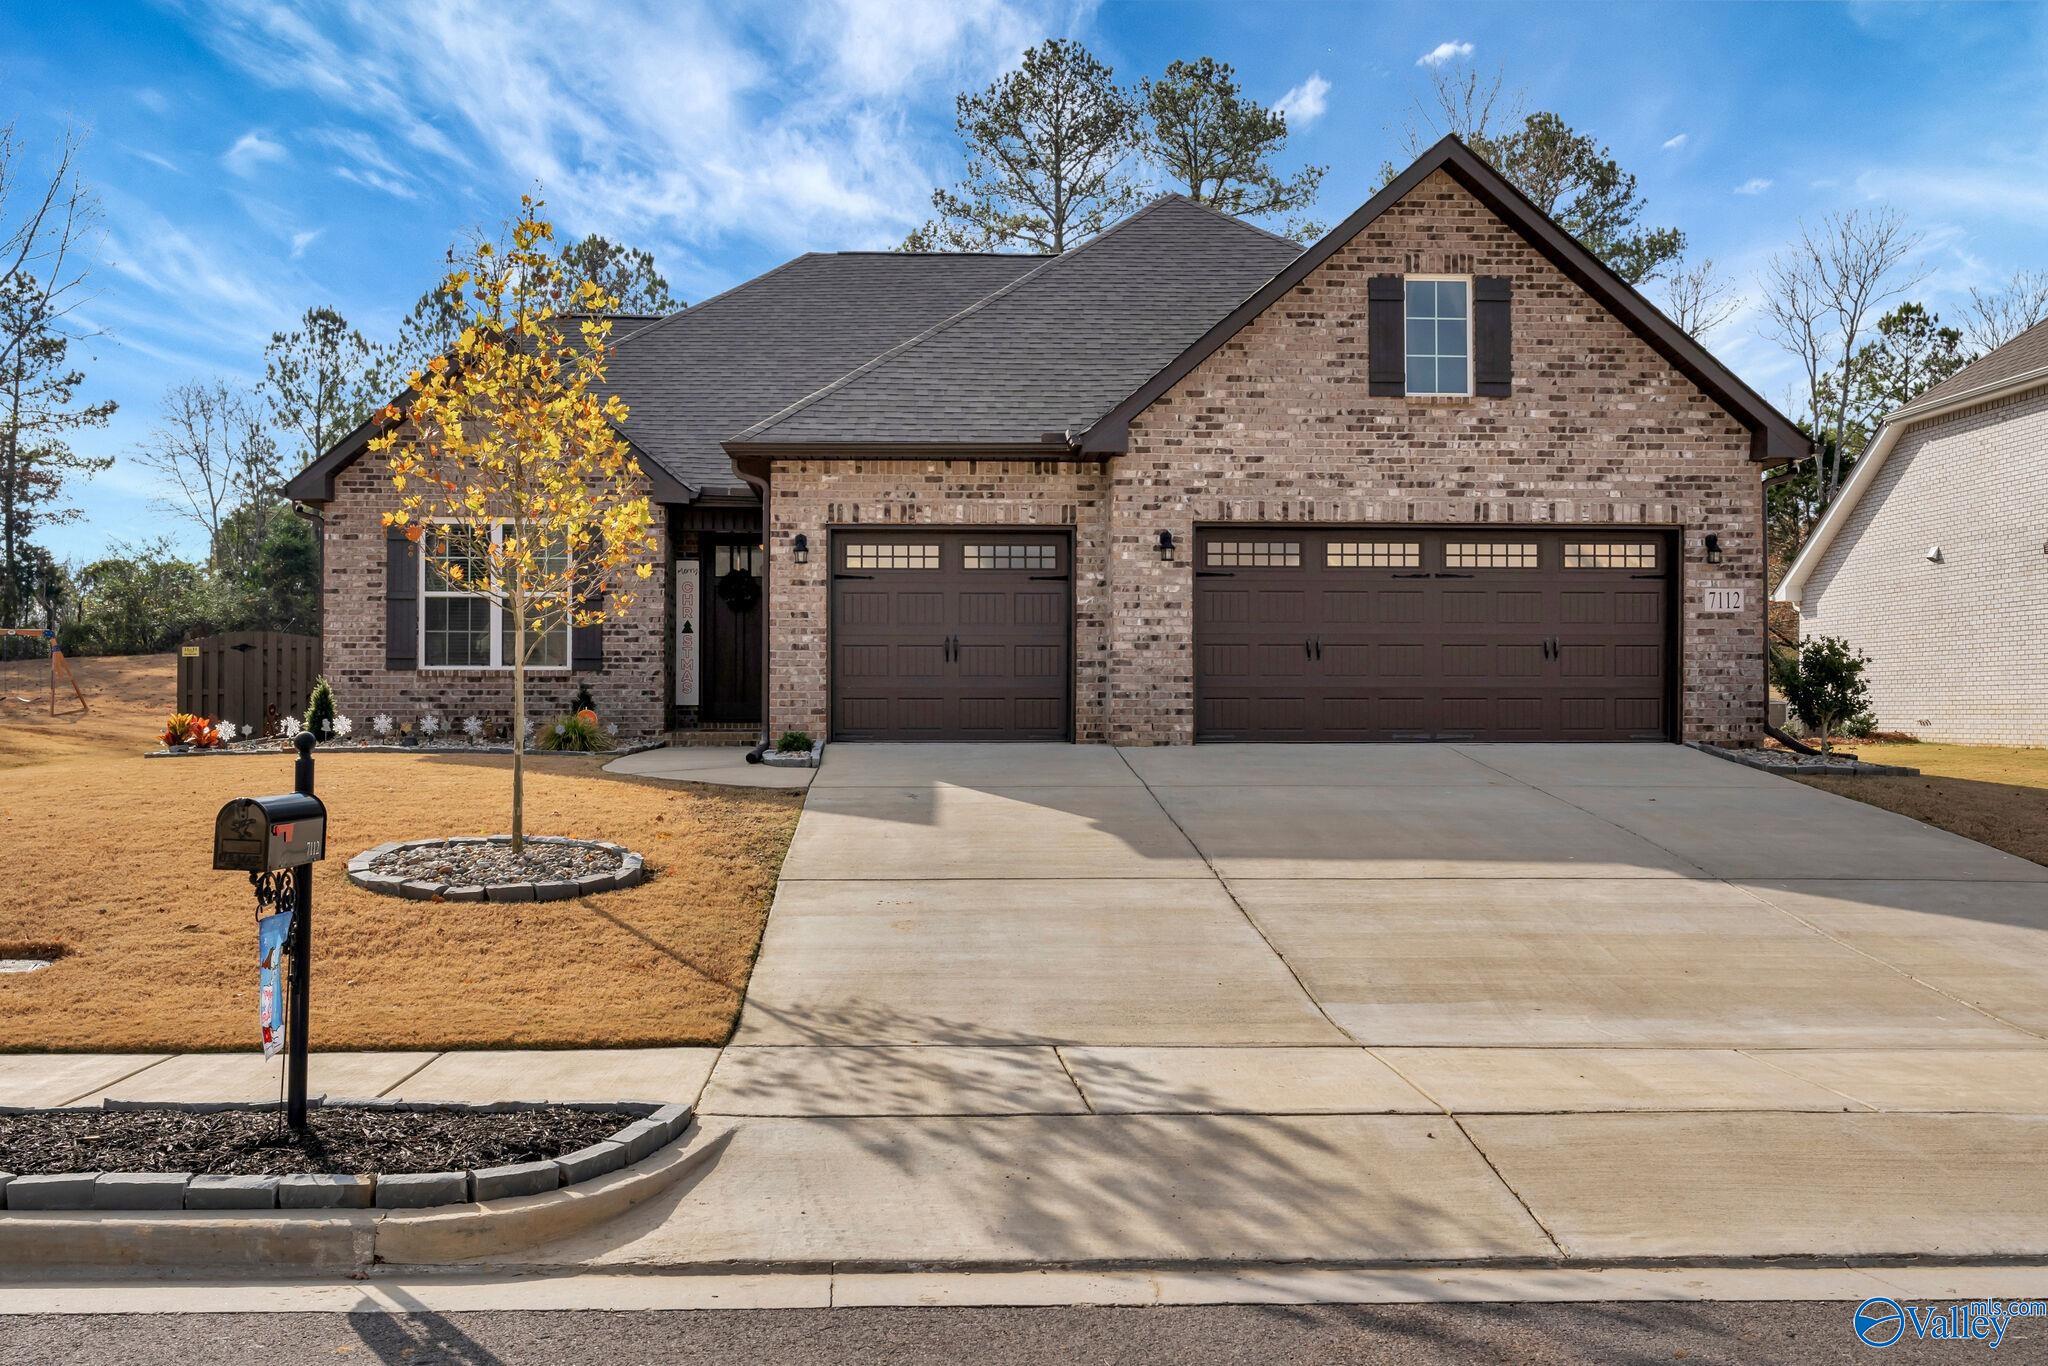 Property: 7112 Hickory Cove Way,Gurley, AL